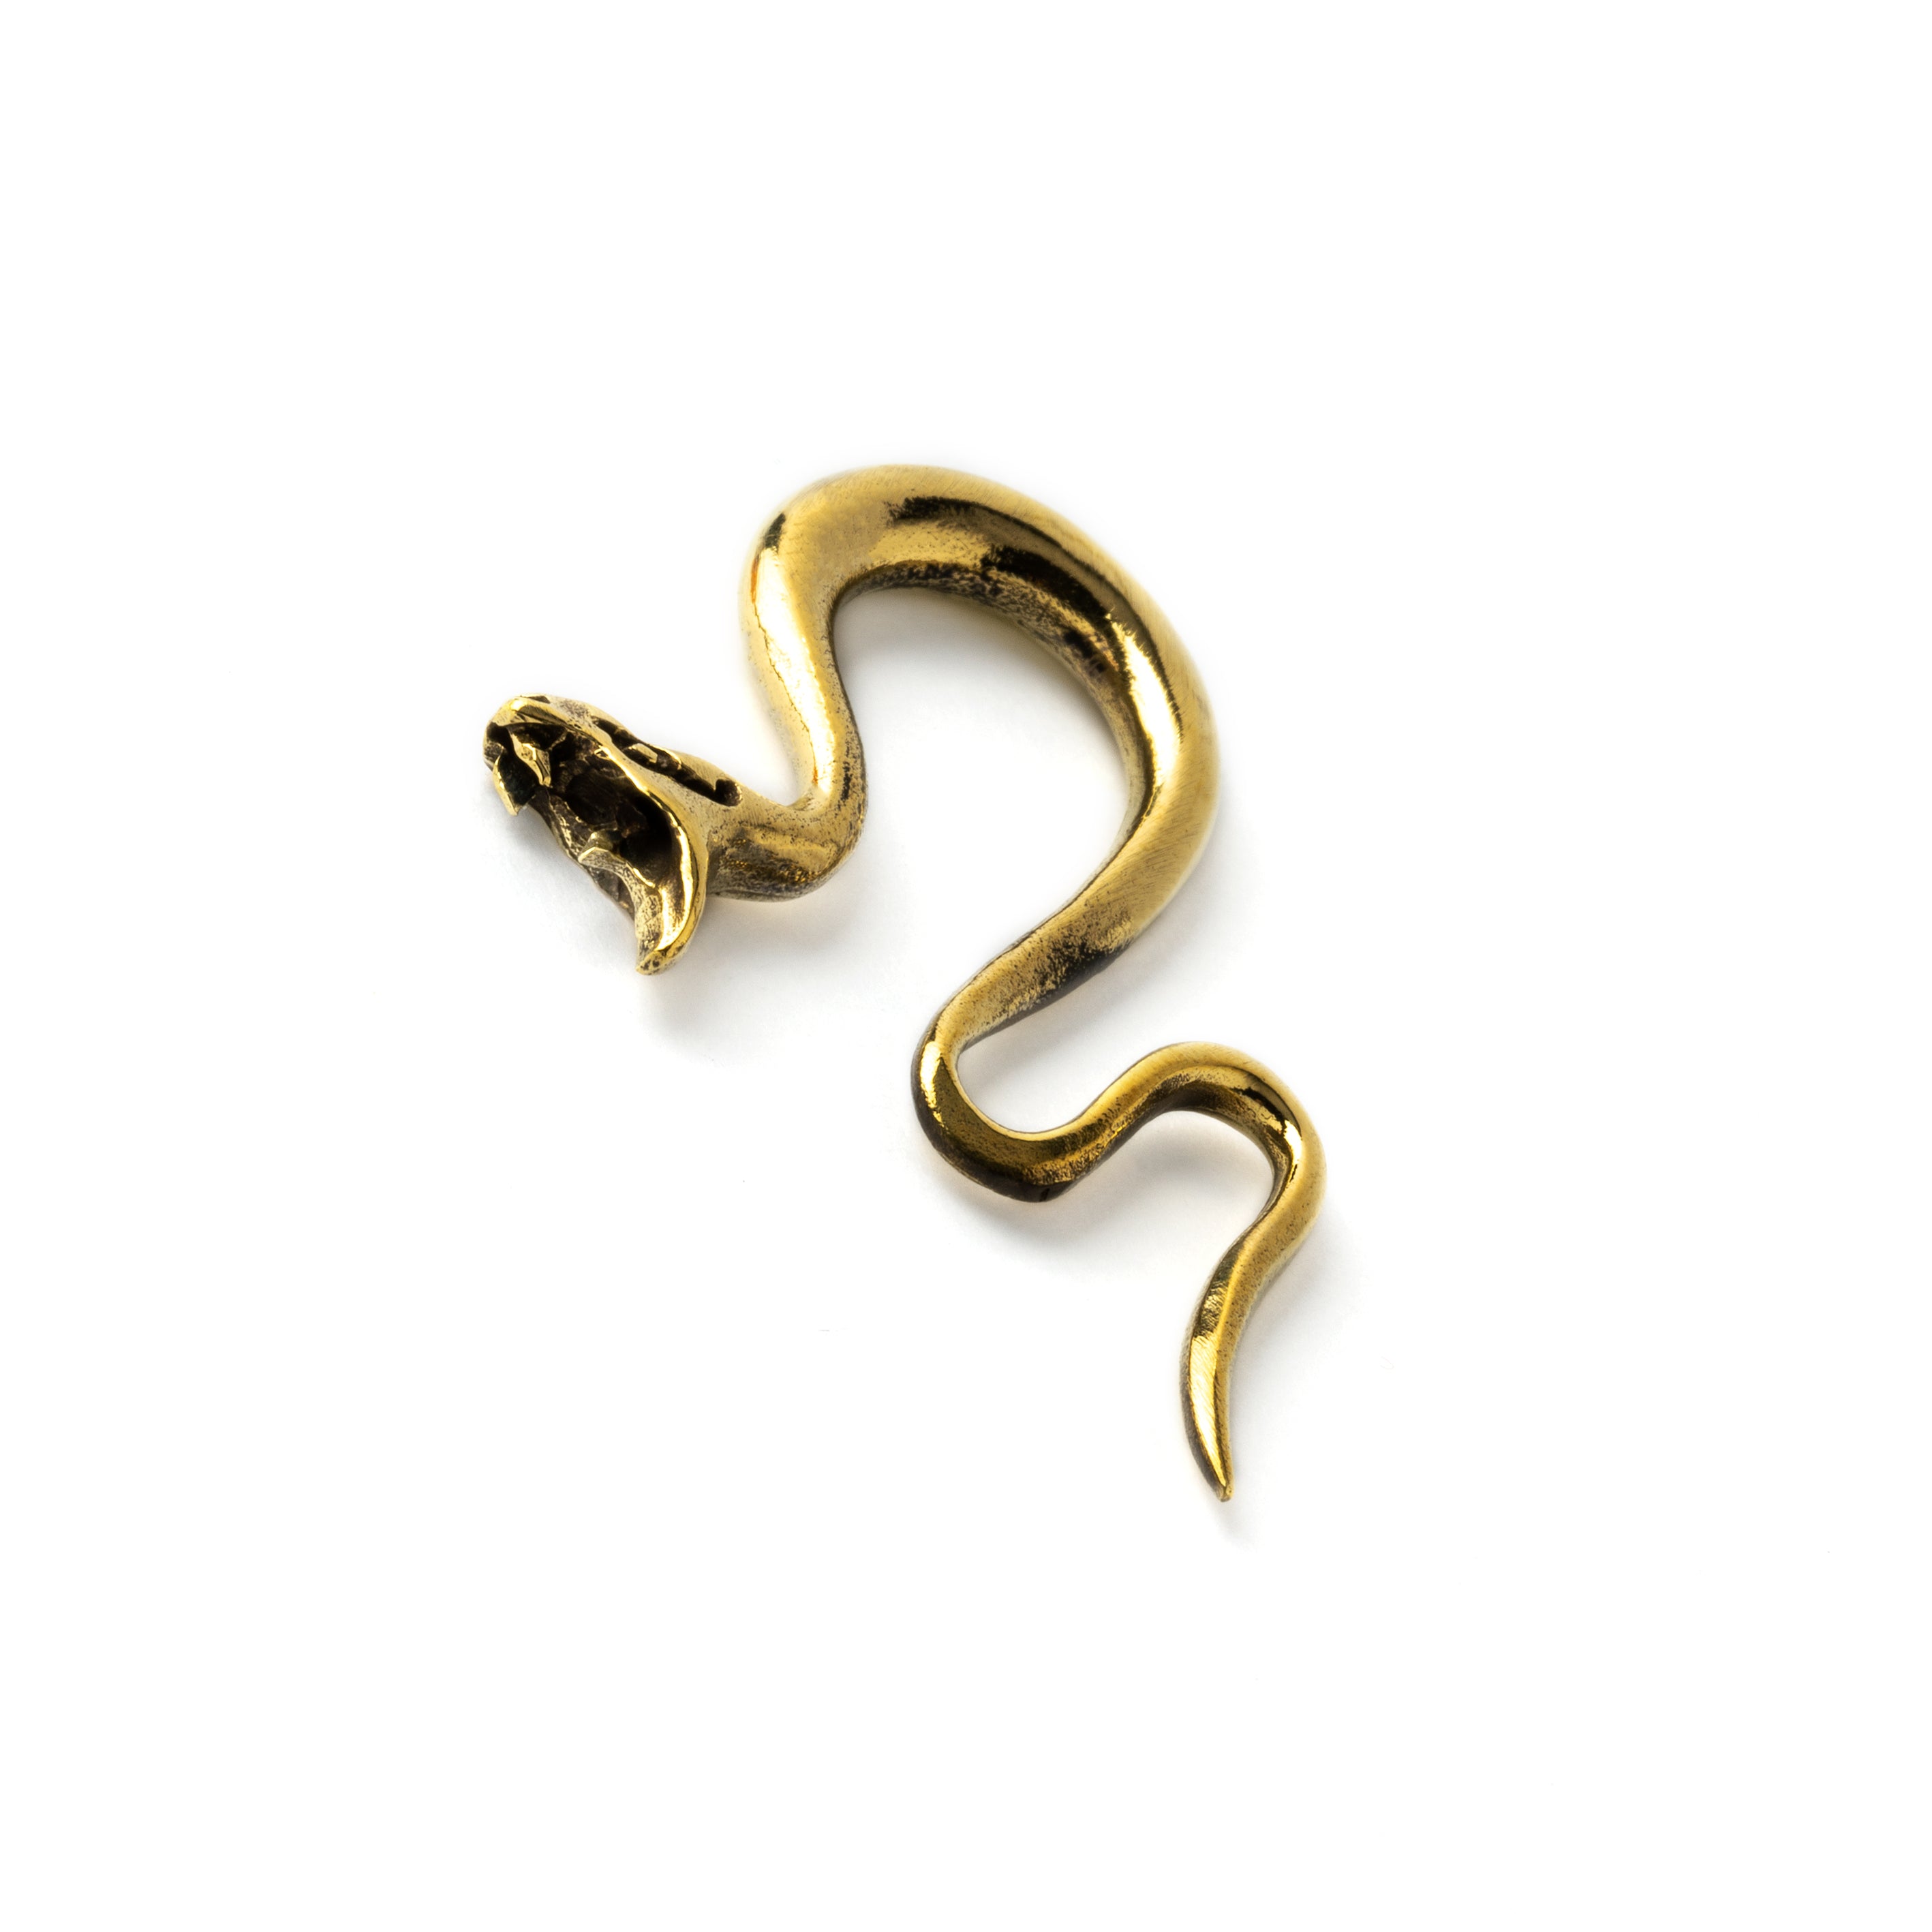 gold brass serpent ear hanger stretcher for stretched ears side view